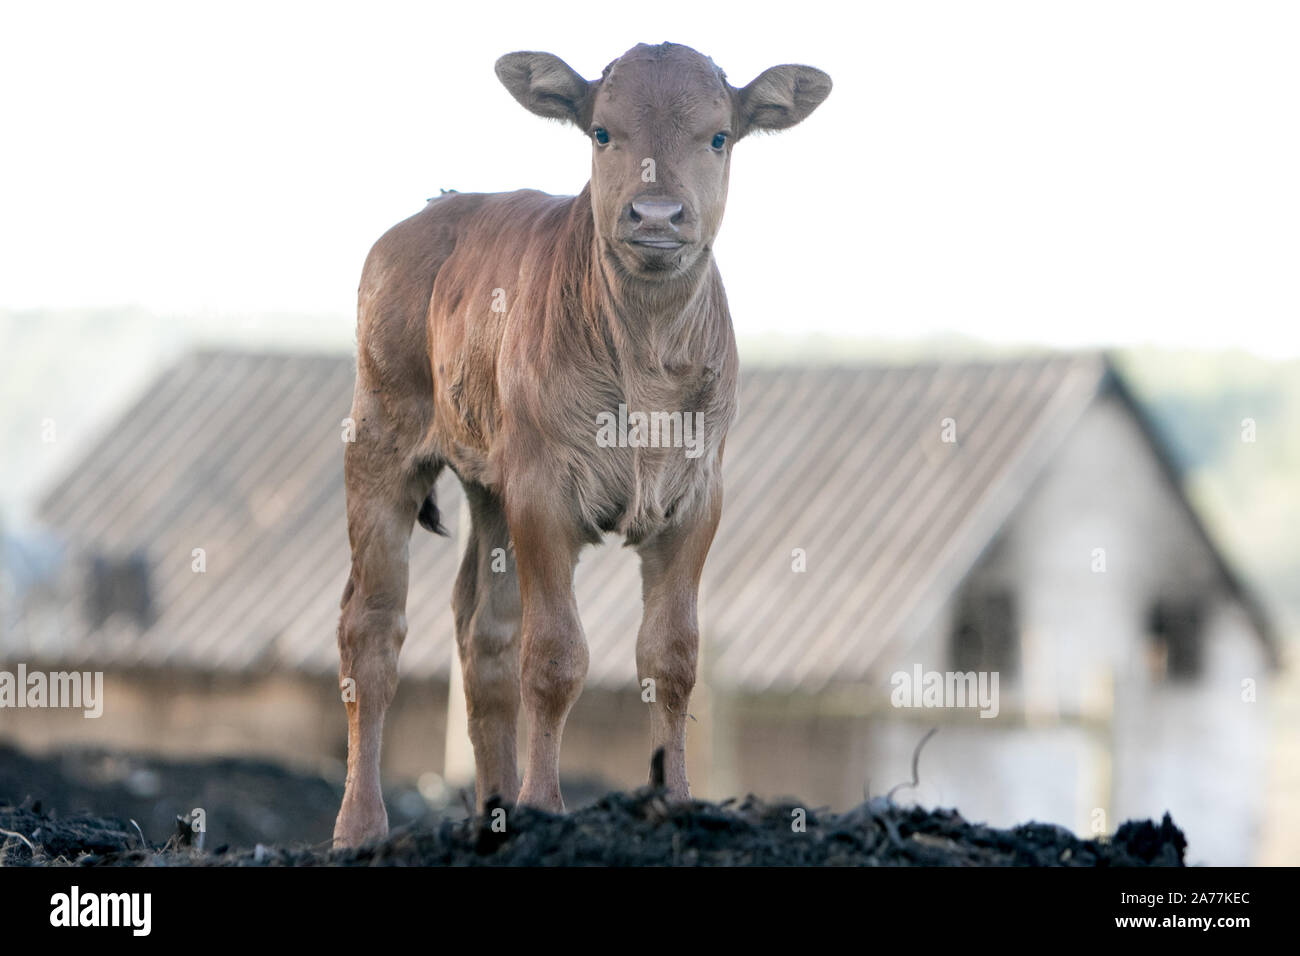 Inquisitive calf on the farm in front of a shed Stock Photo